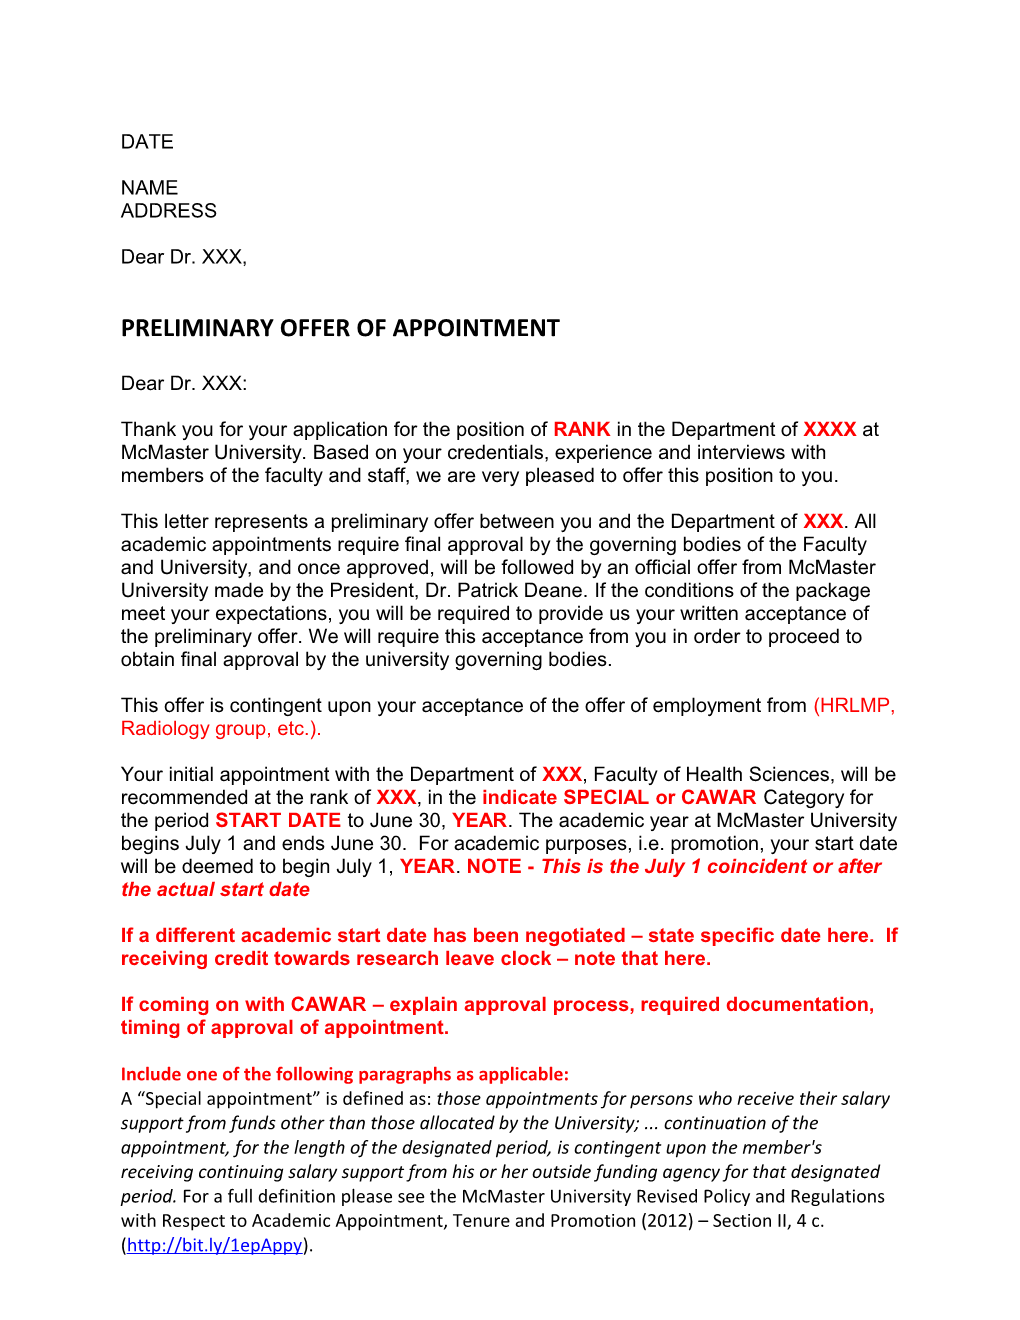 Preliminary Offer of Appointment